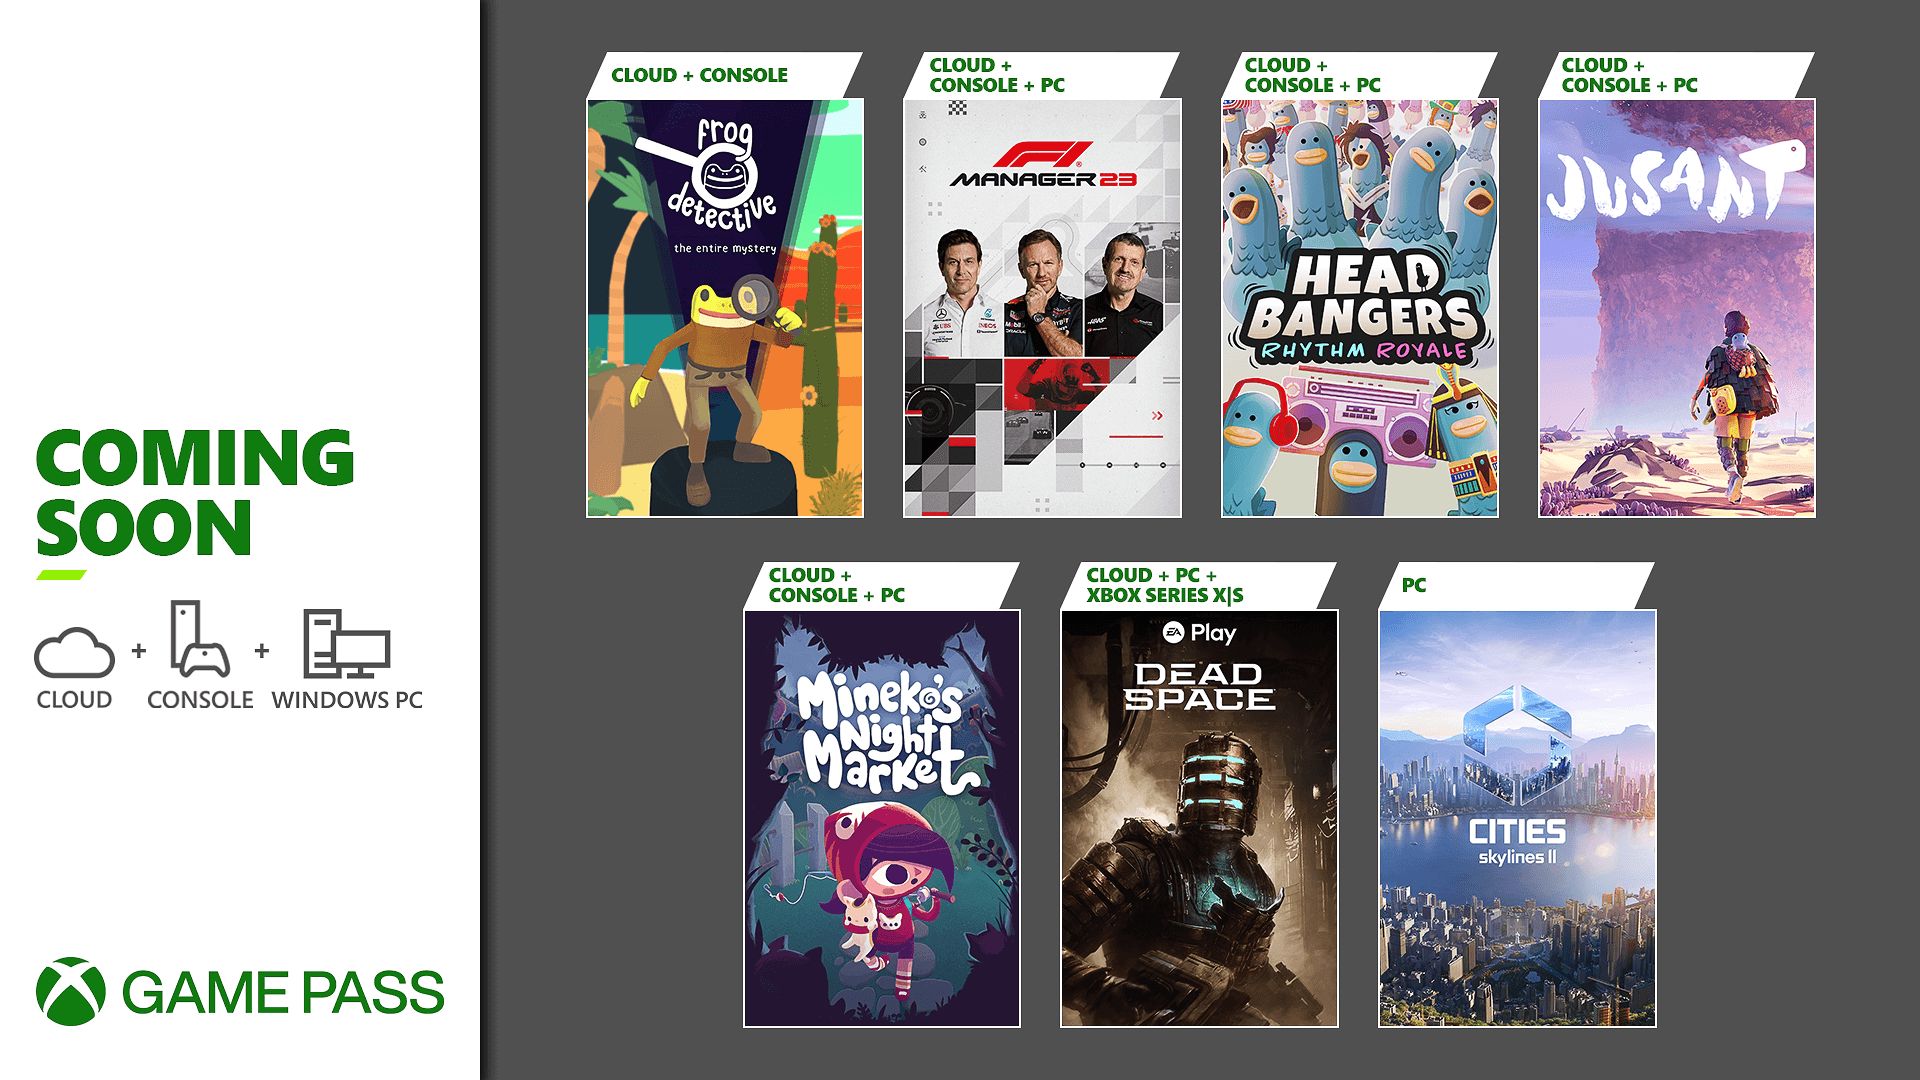 Xbox Game Pass games list, price and what you need to know